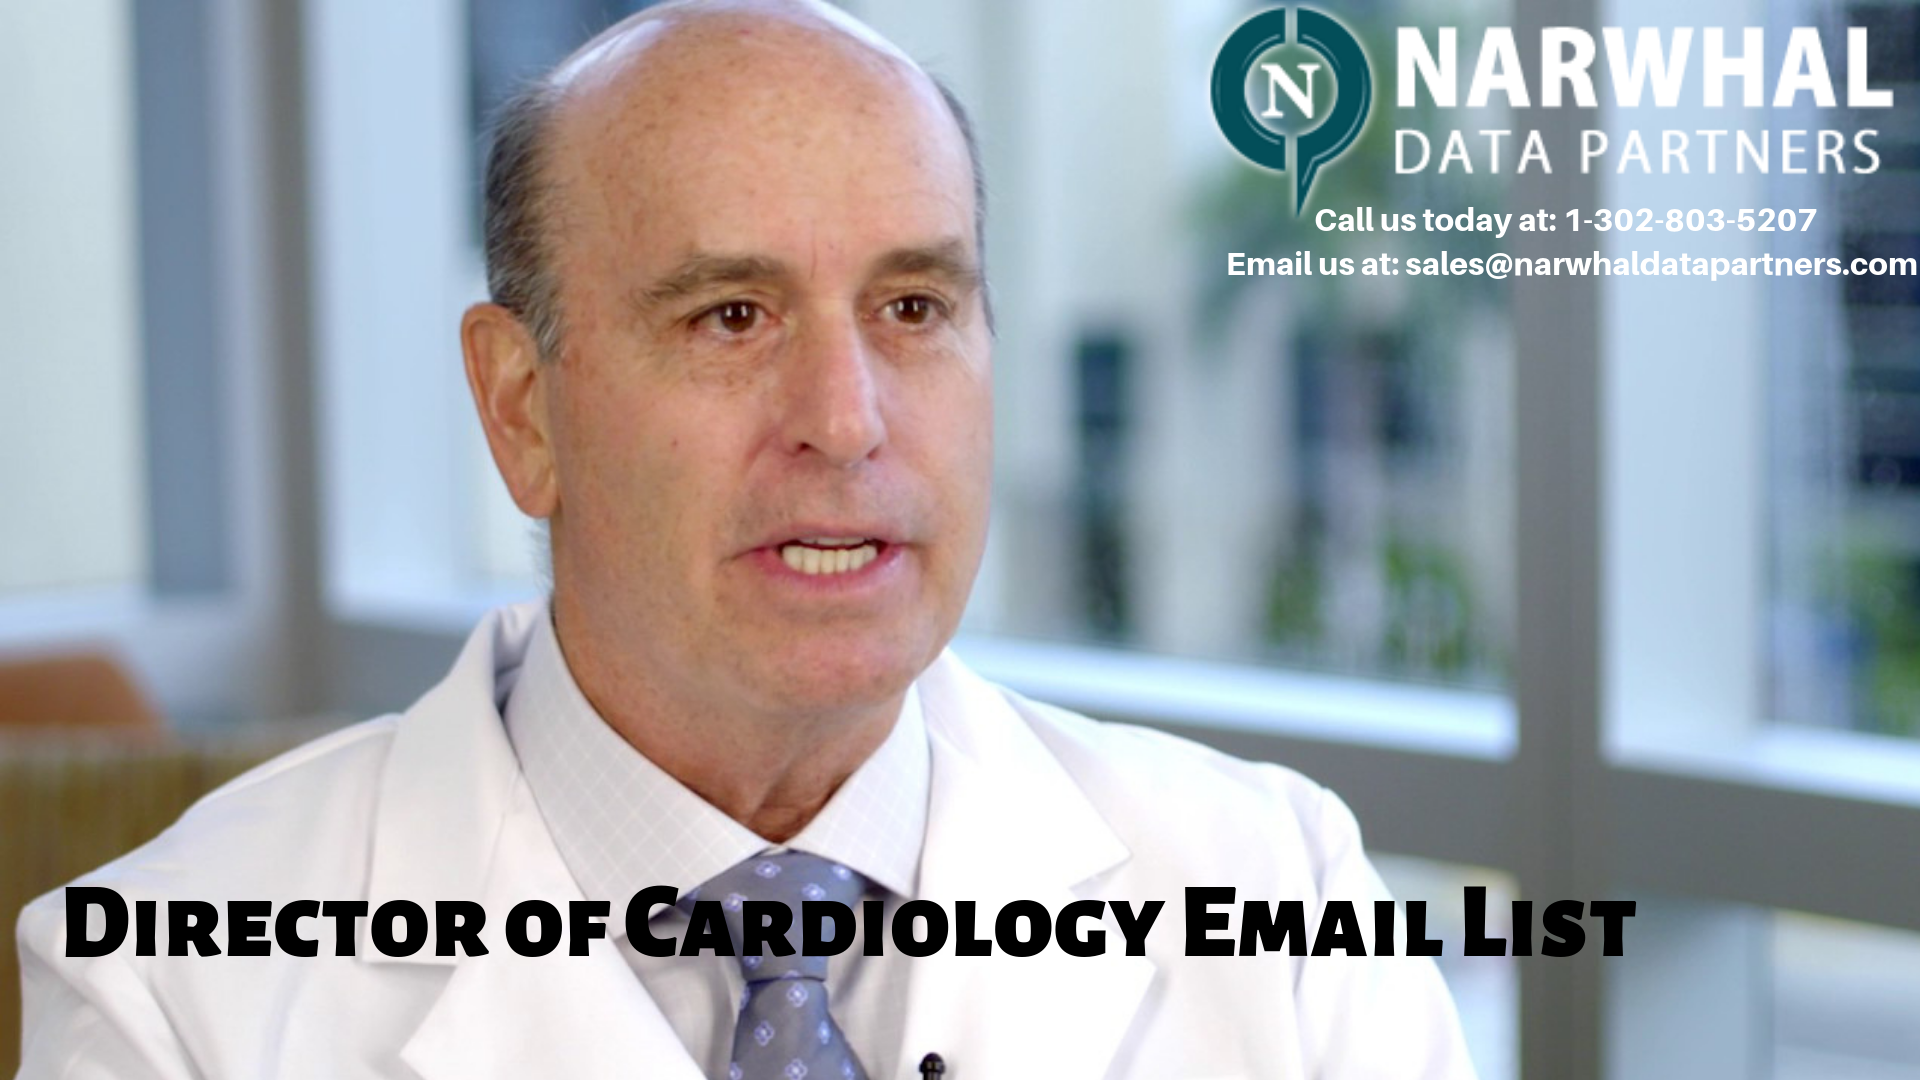 http://narwhaldatapartners.com/director-of-cardiology-email-list.html